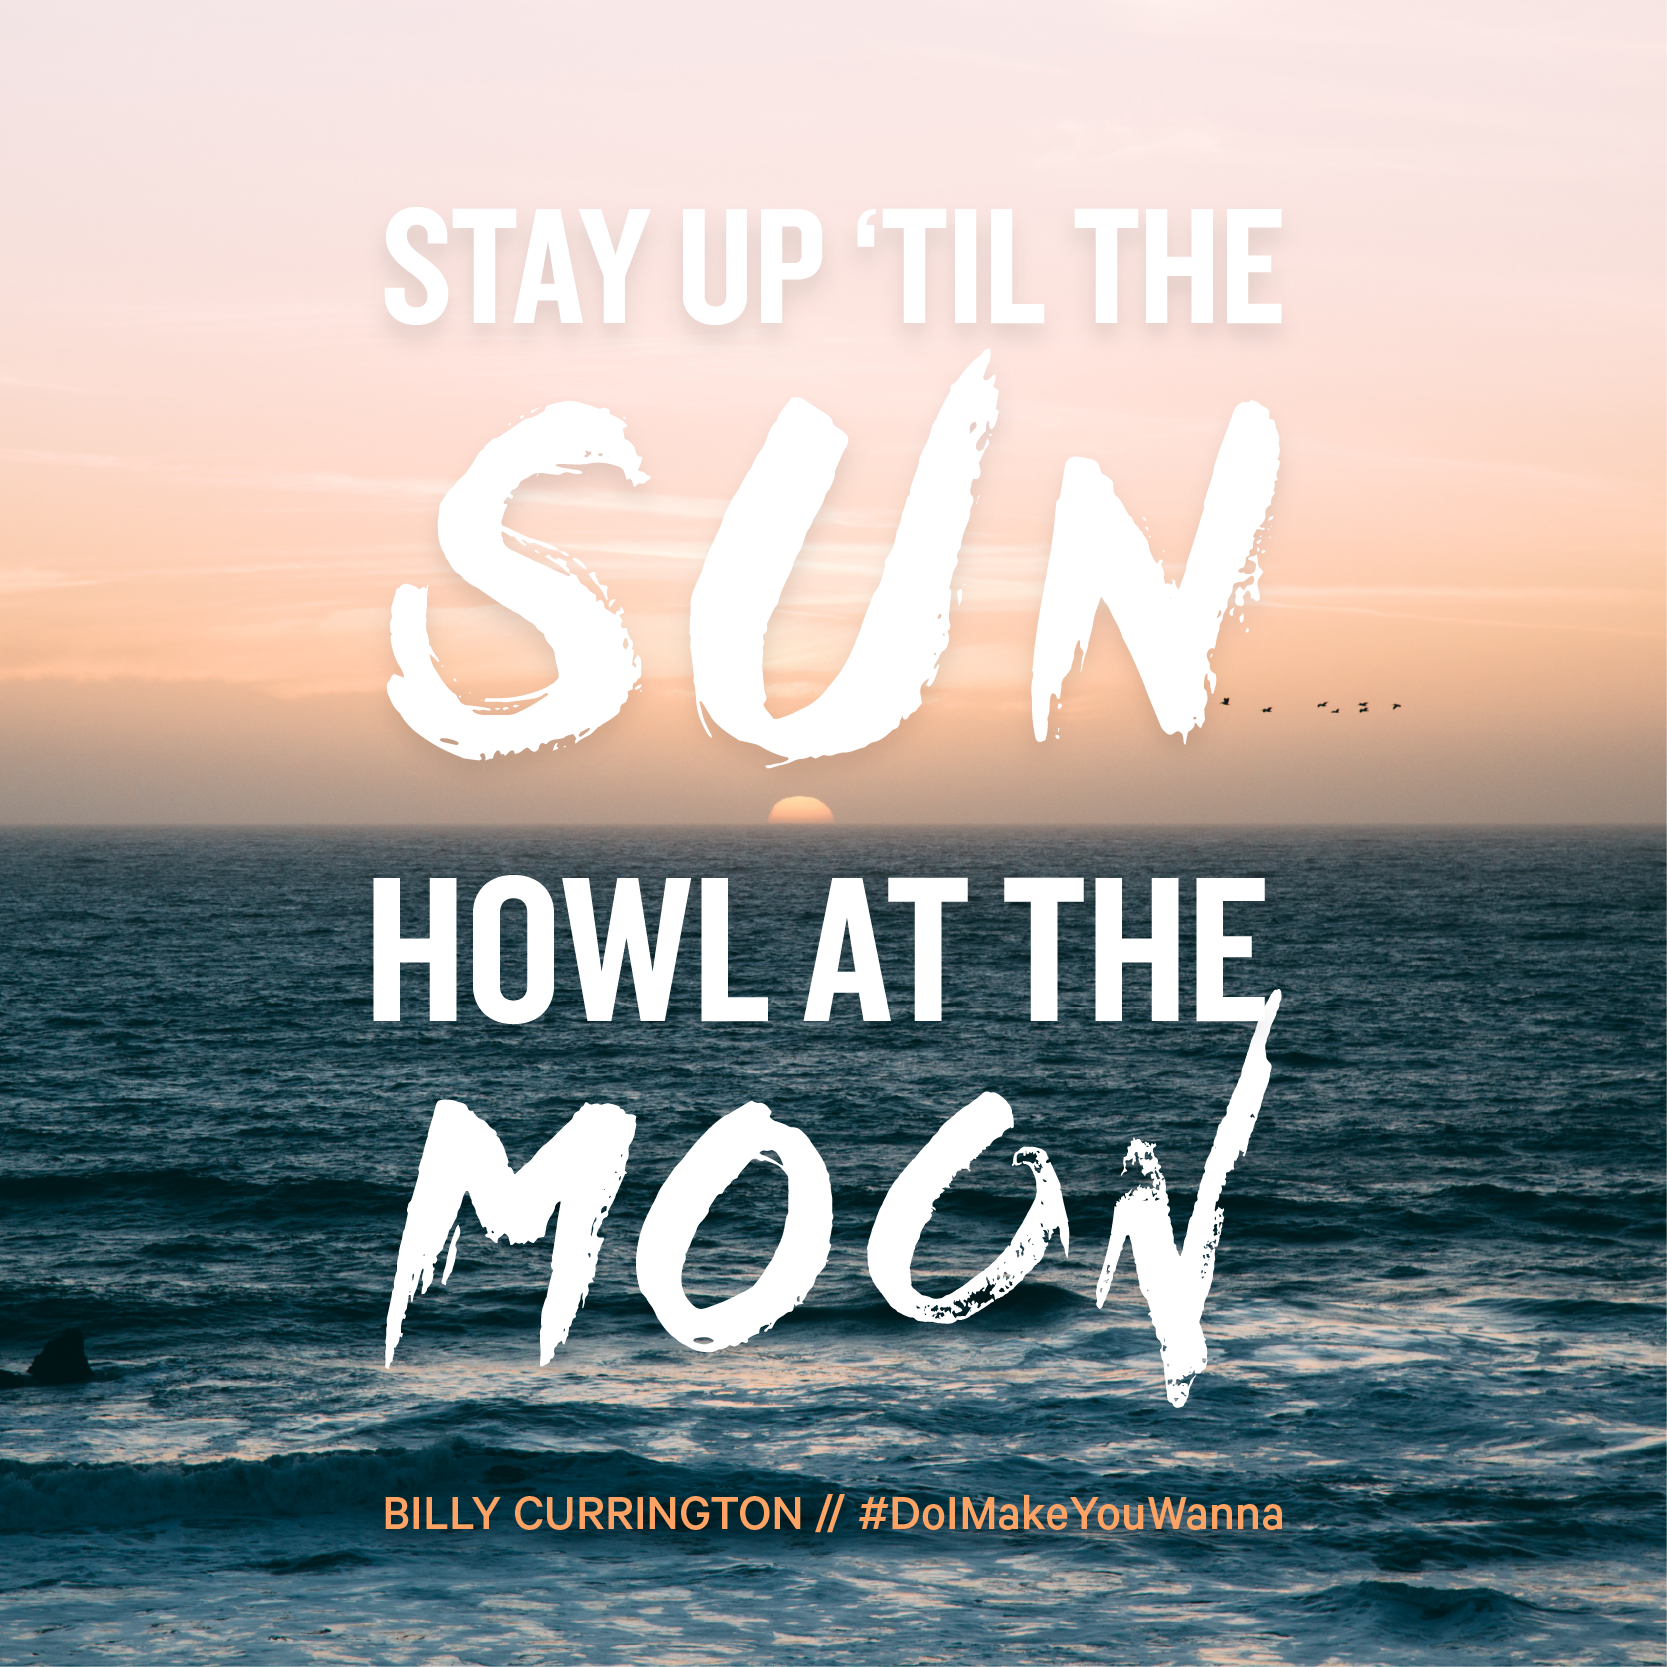 "Stay up 'til the sun howl at the moon." Billy Currington